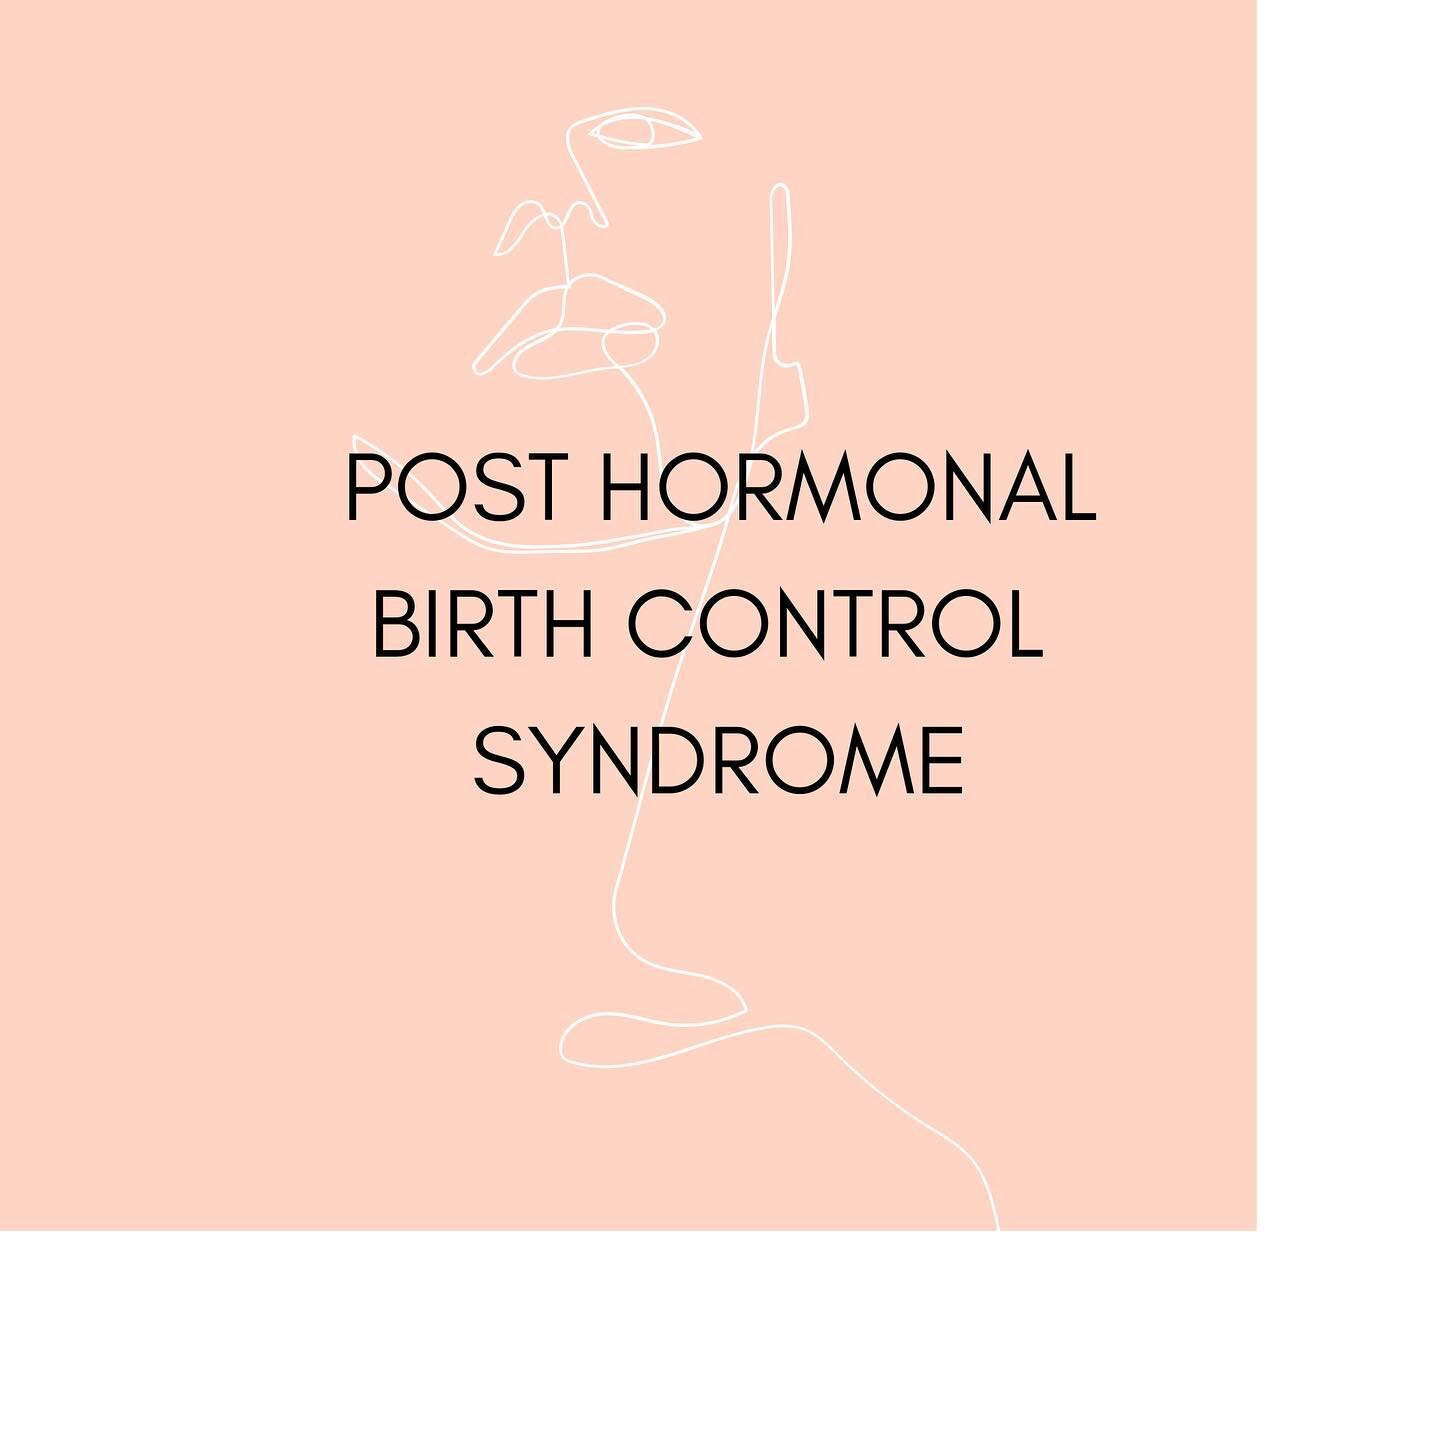 Post-Hormonal Birth Control Syndrome is defined by a bunch of unpleasant symptoms women experience after going off the birth control pill

Growing up, lots of my friends (myself included), went on the pill because of irregular periods, heavy or painf